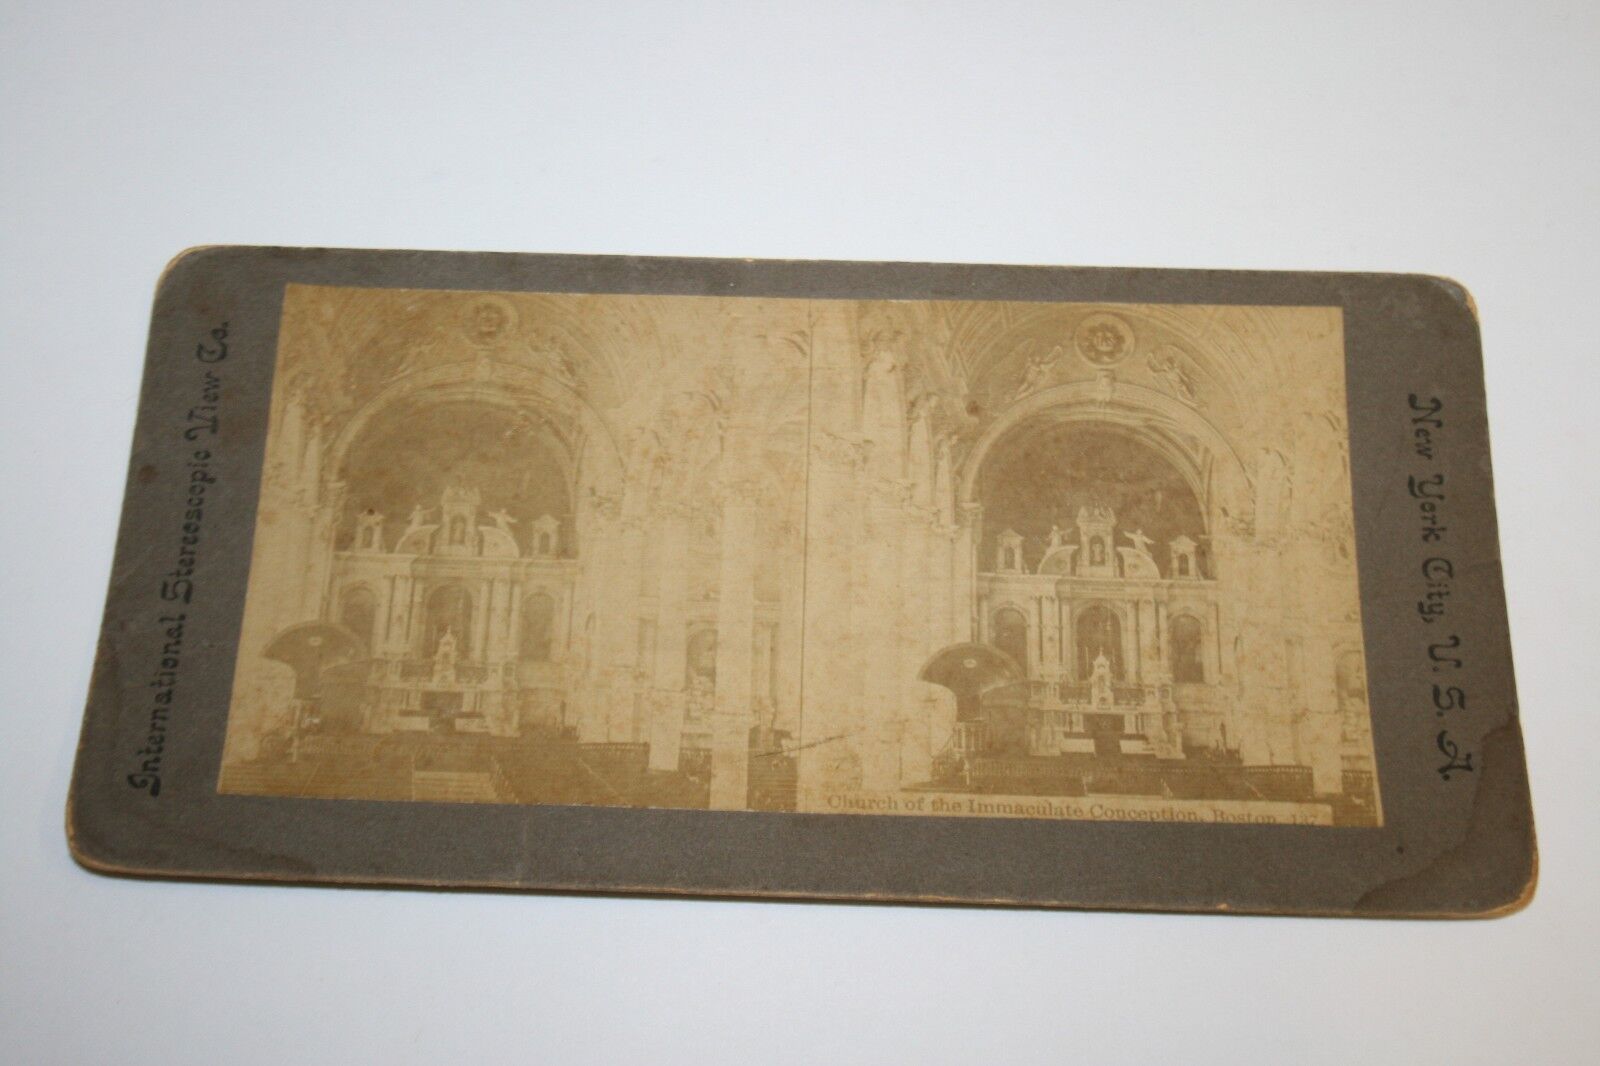 Vintage 1880s Boston MA Church of the Immaculate Conception Photo Stereoview